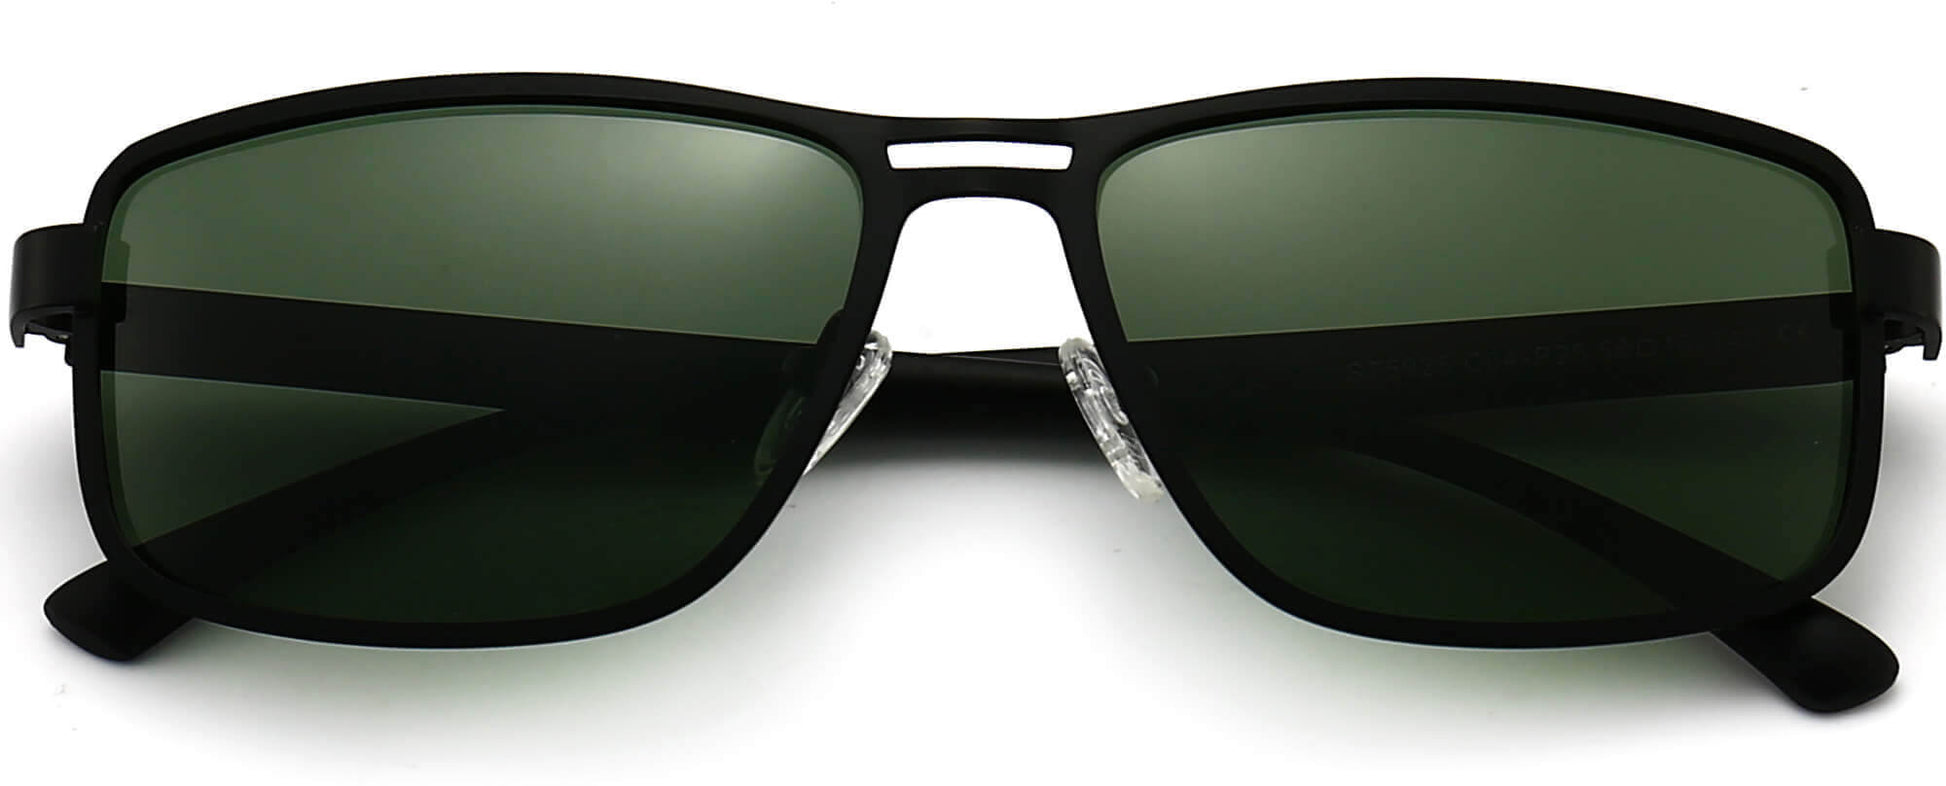 Adeline Black Stainless steel Sunglasses from ANRRI, closed view